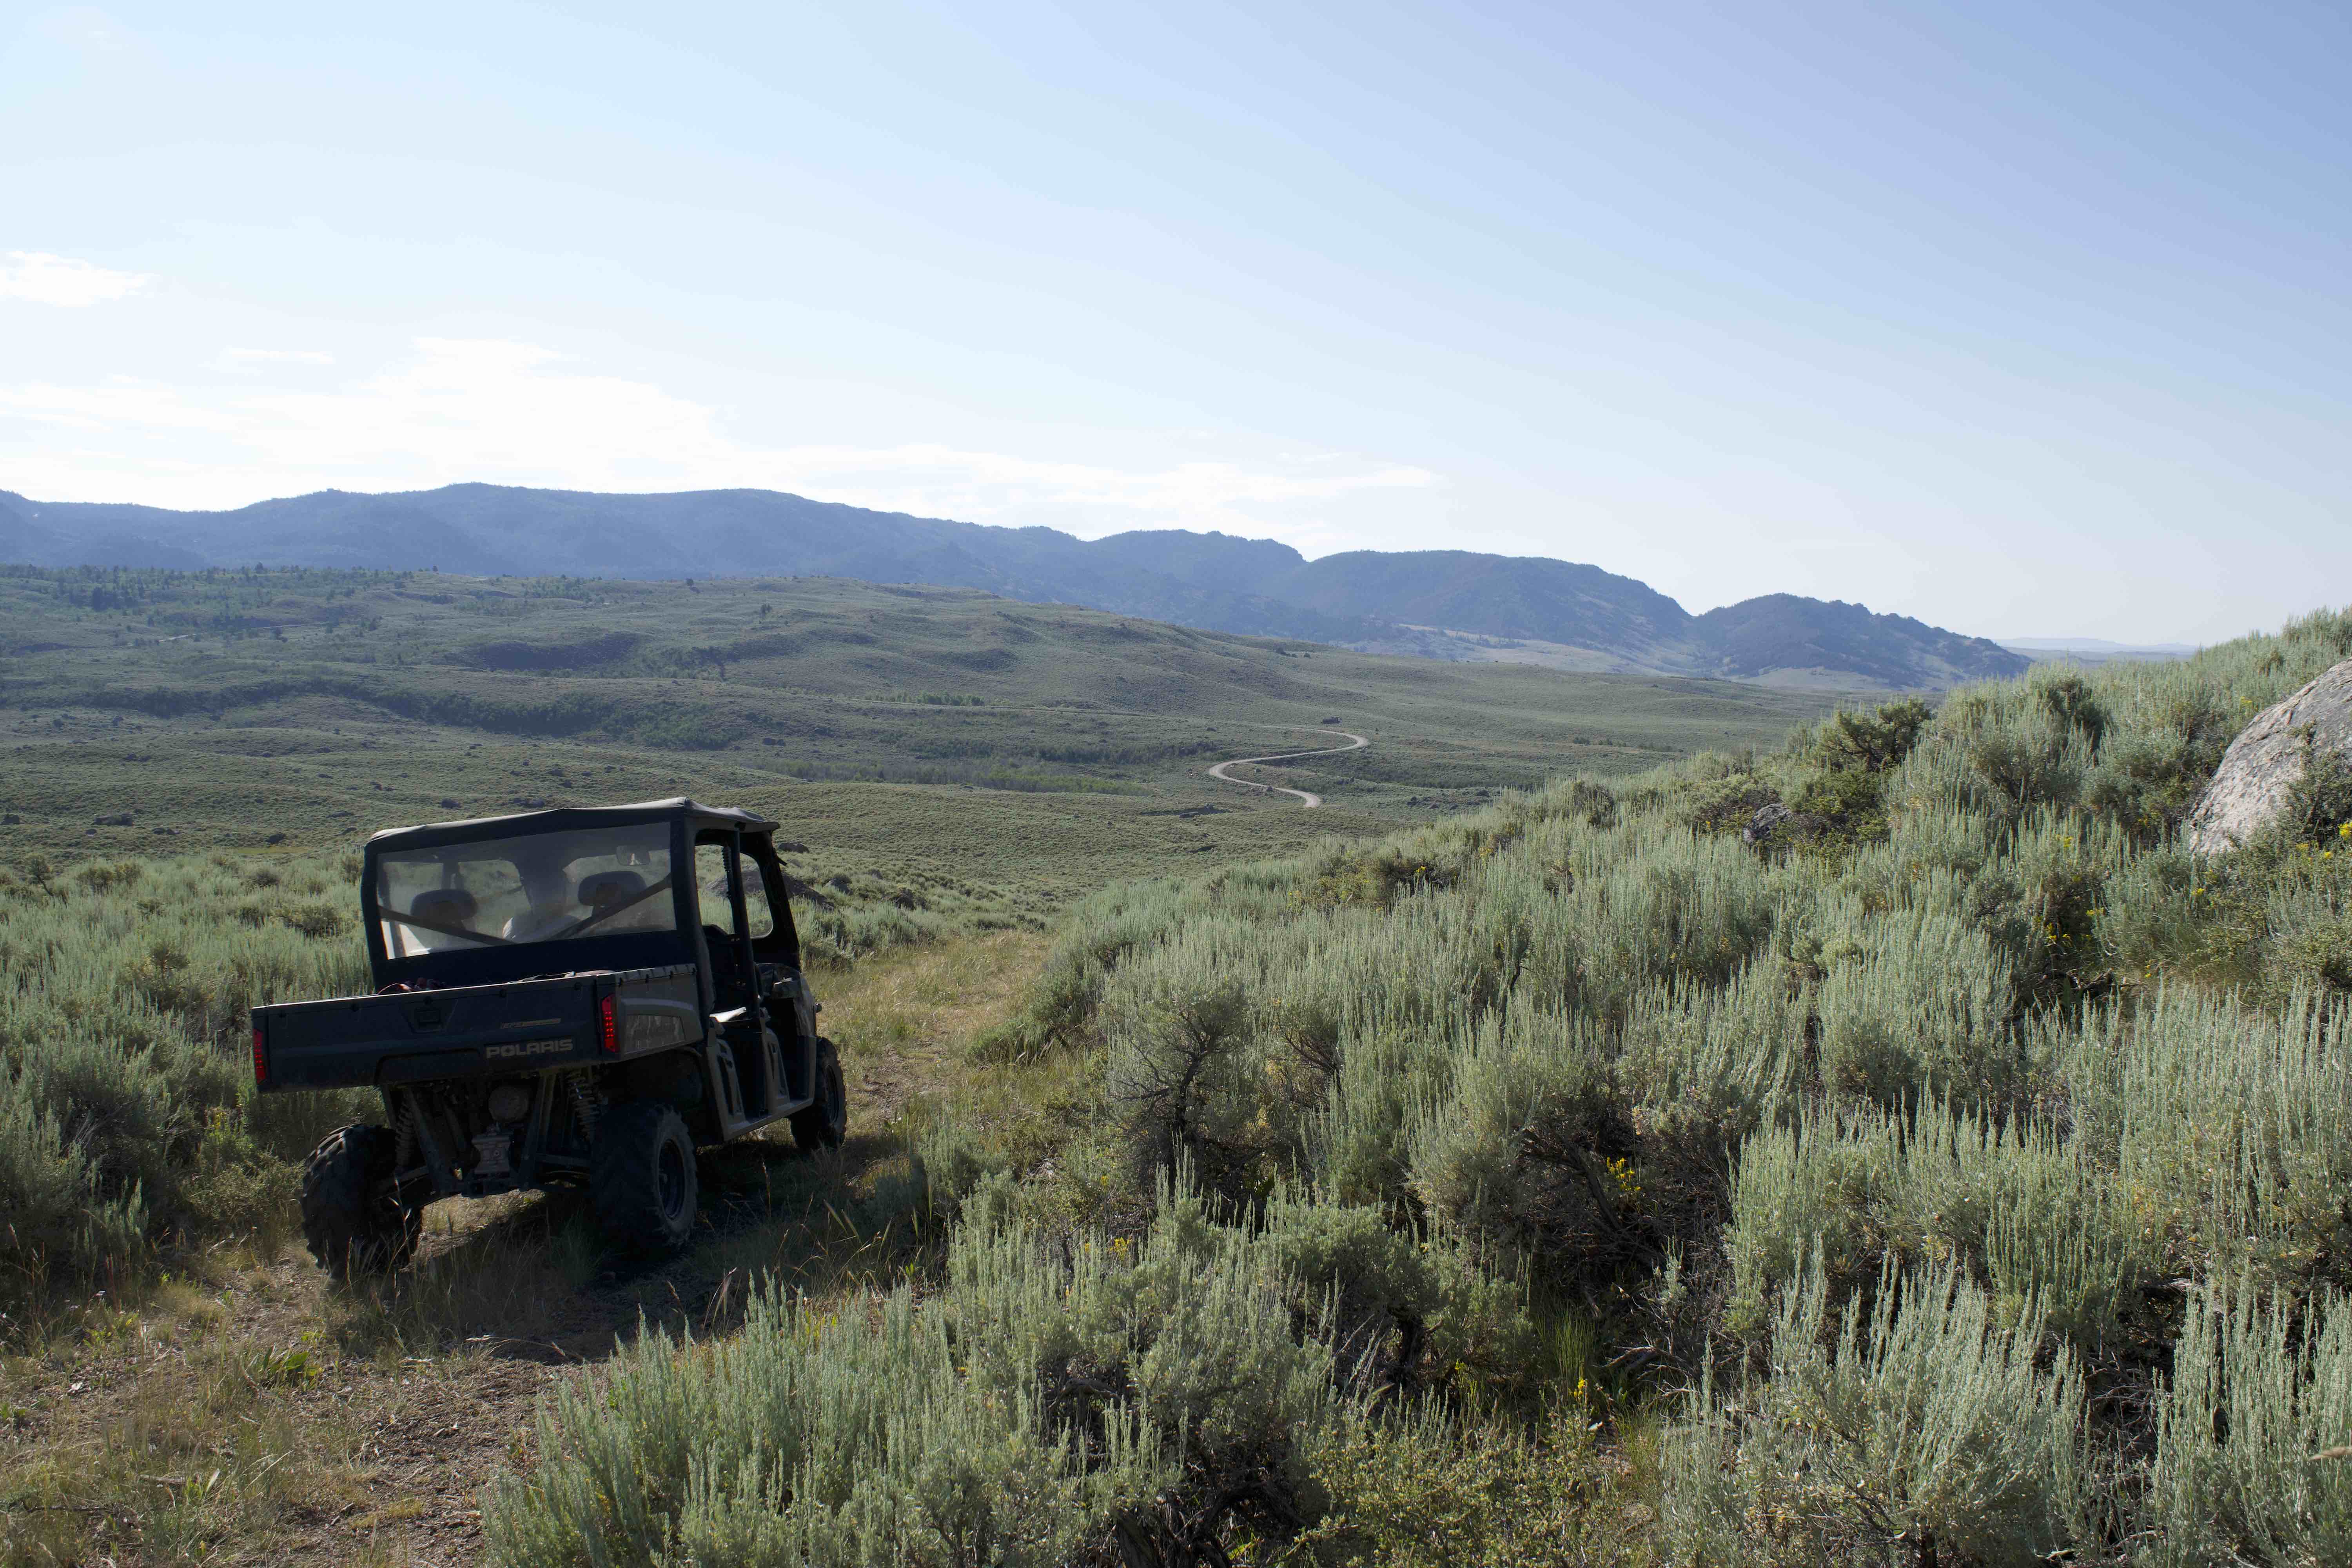 Morris worked with the Sage Grouse Initiative and other conservation partners to treat cheatgrass along roads and aerially.